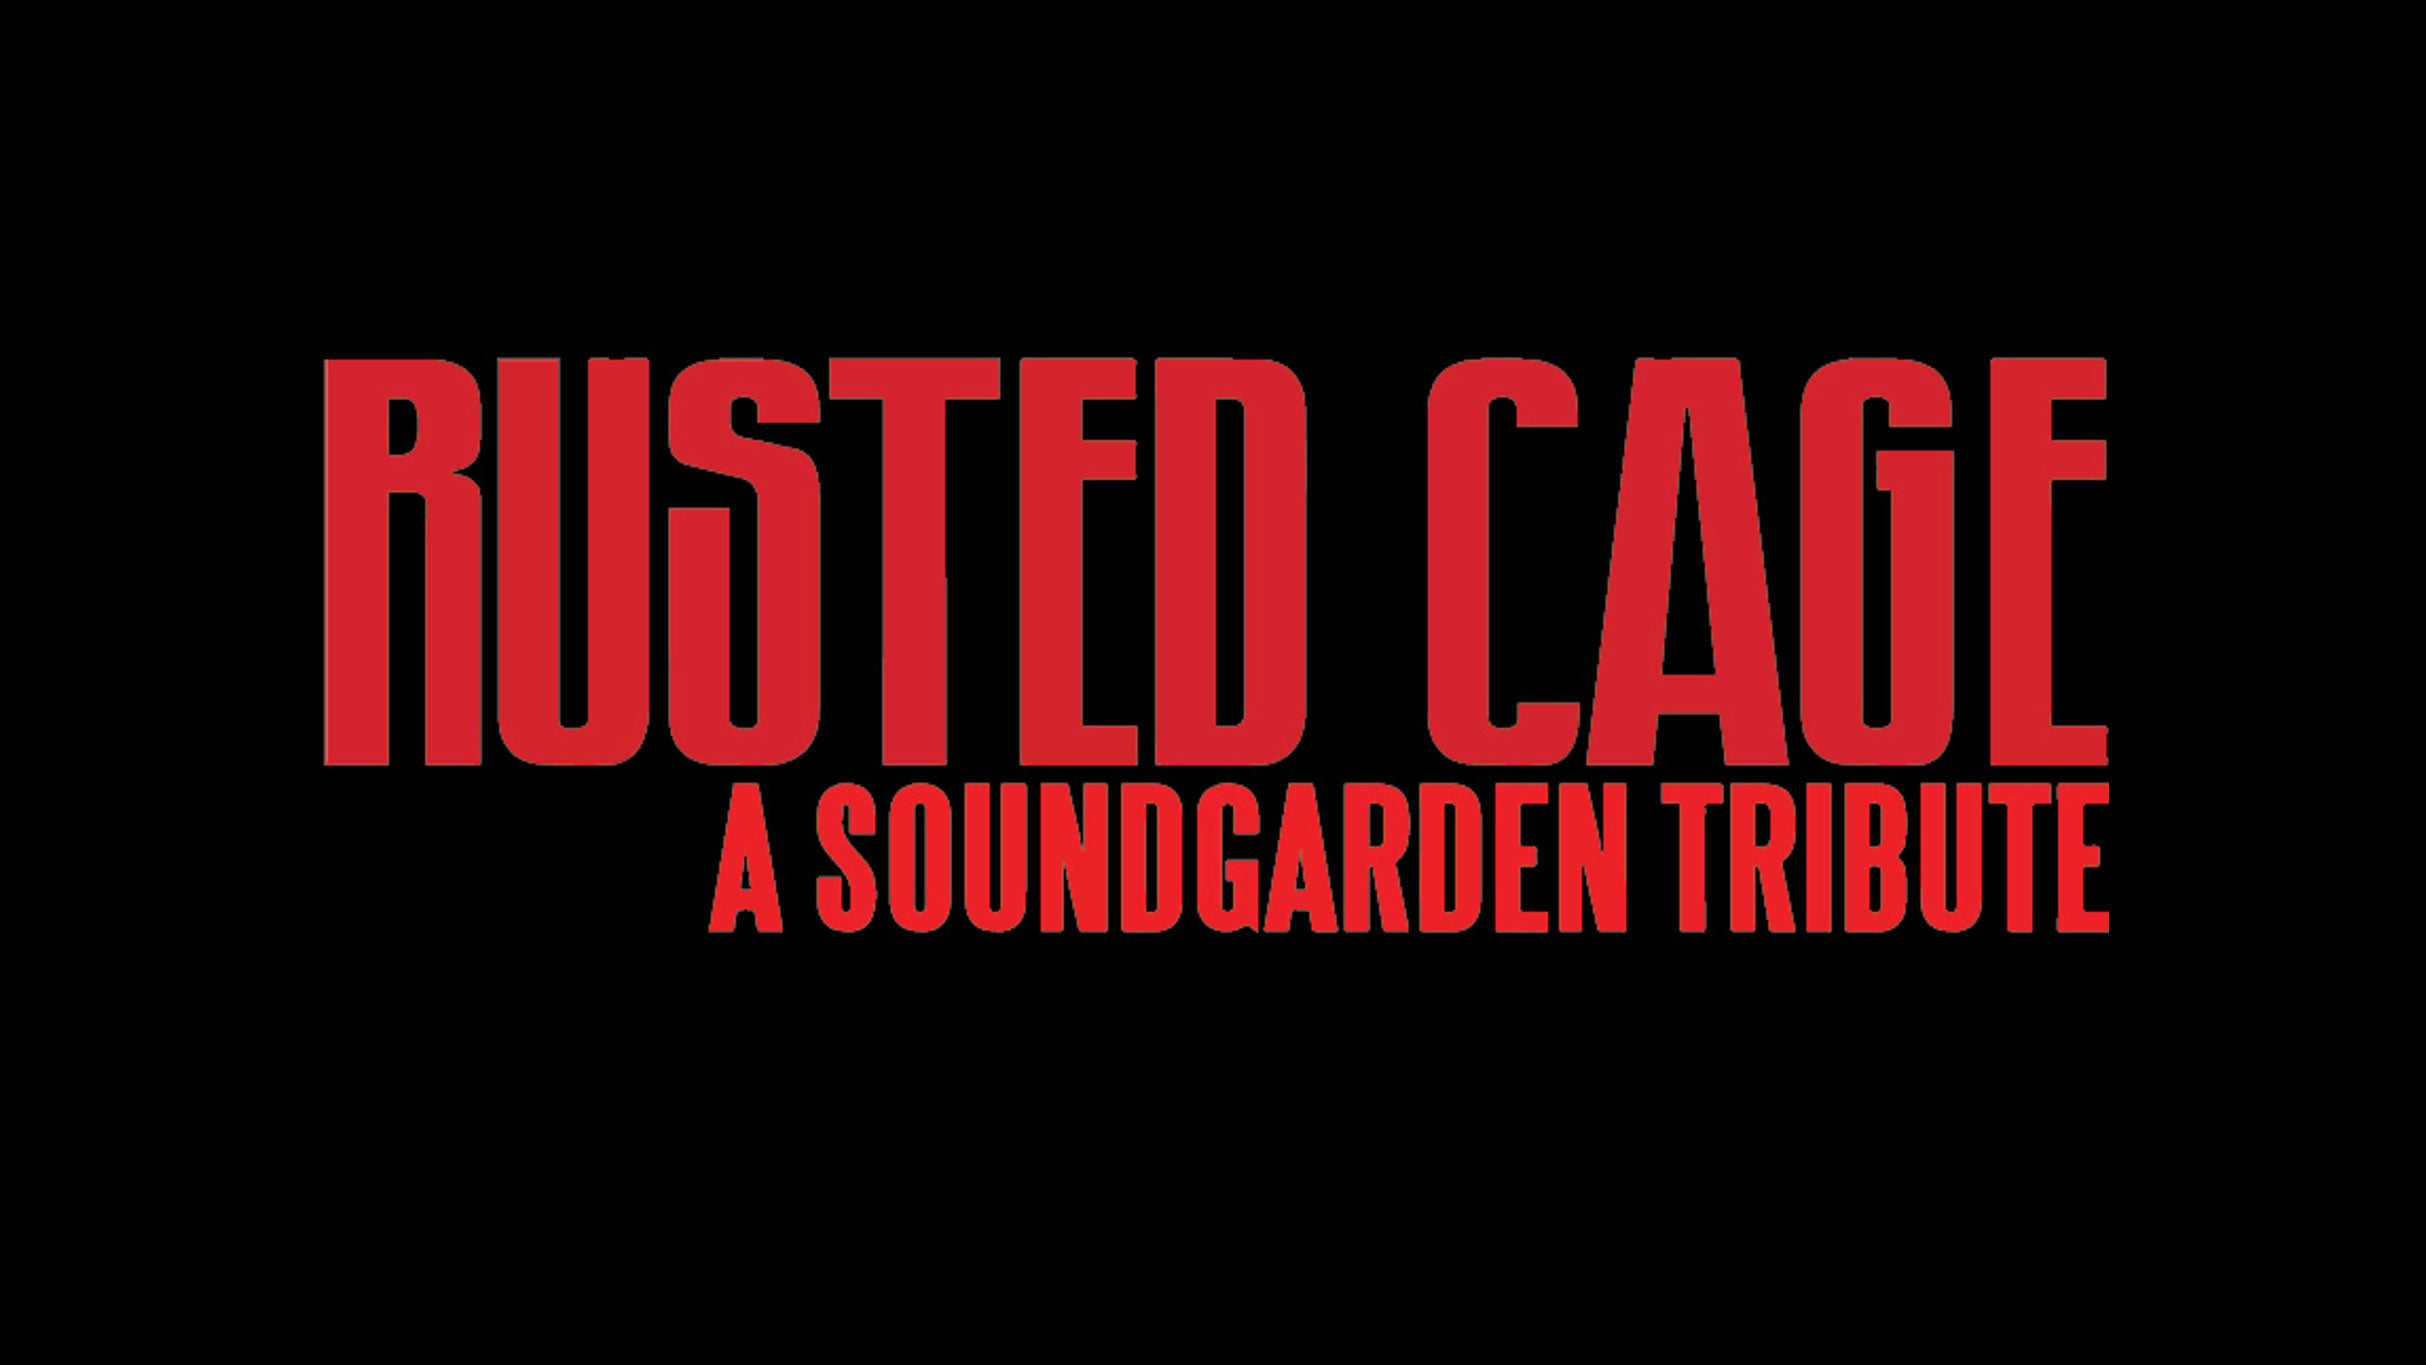 Image used with permission from Ticketmaster | Chris Cornell tribute featuring Rusted Cage tickets